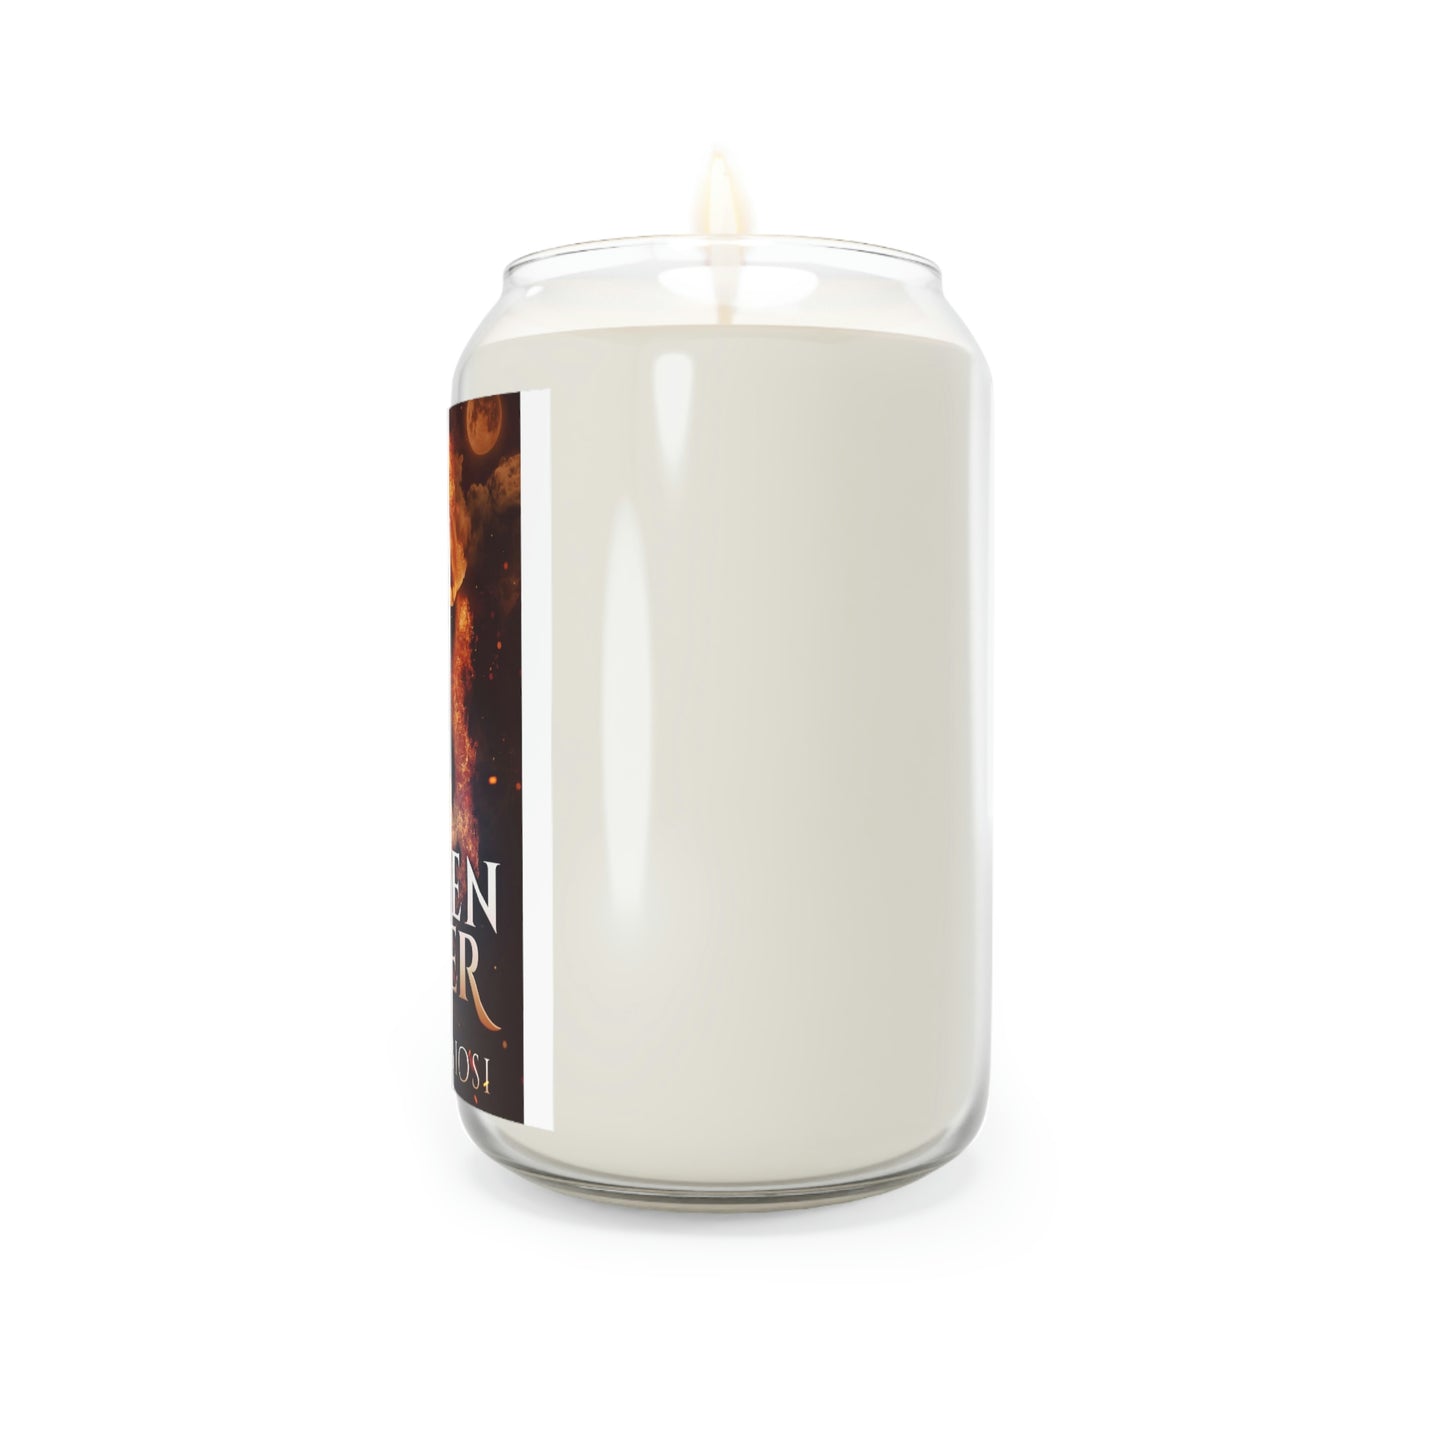 Fallen Lover - Scented Candle